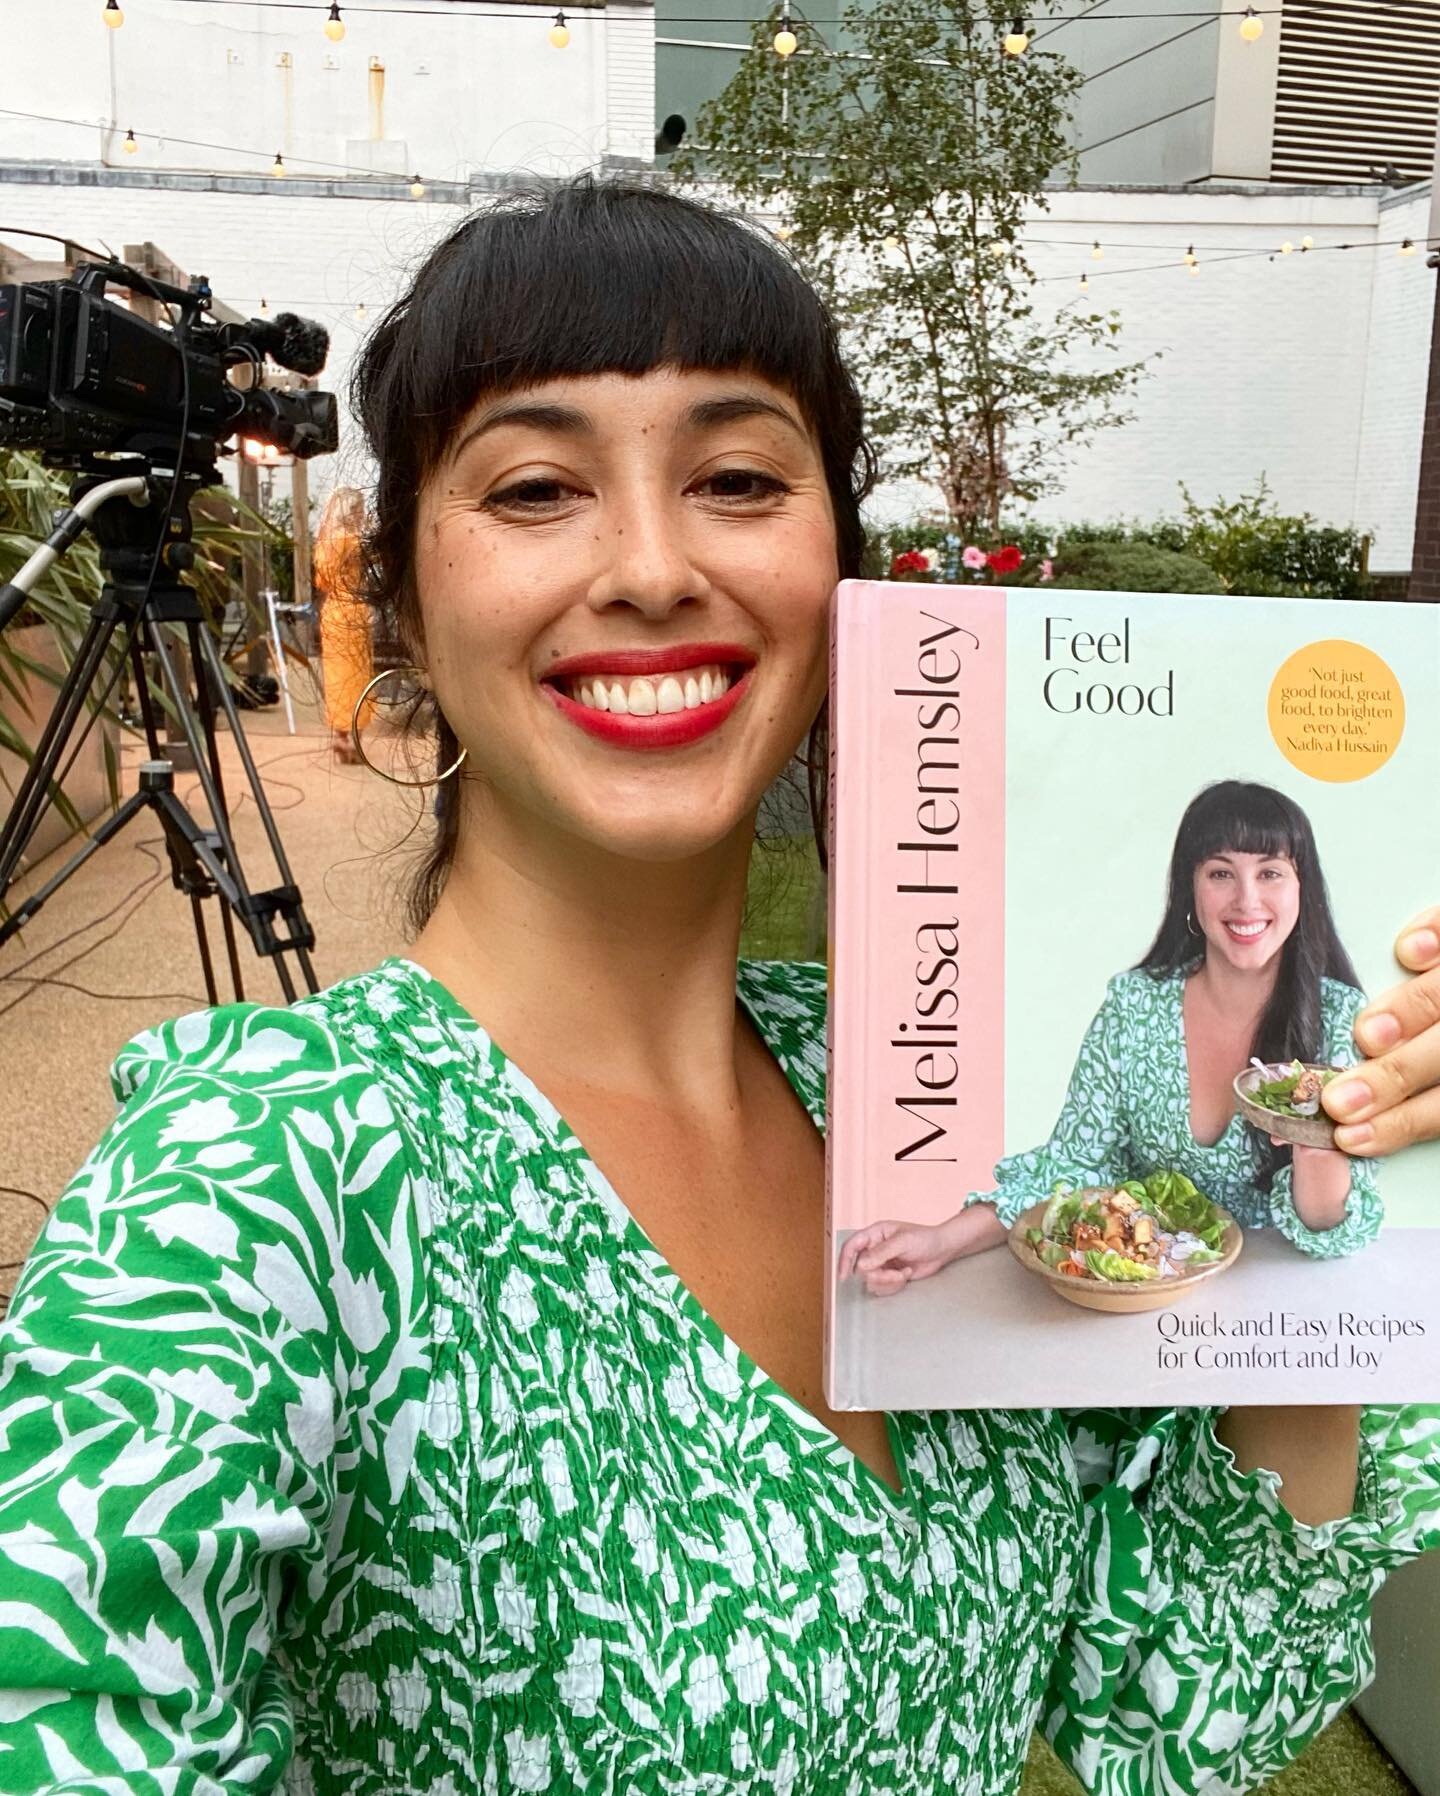 📺 On morning TV today 🎥 making 👉🏽 easy lunchboxes that are good enough for a Sunday lunch or weeknight dinner @bbcmorninglive Feeding @hollyhamiltontv and @seanfletchertv from my Feel Good cookbook because food and mood are so connected and we al